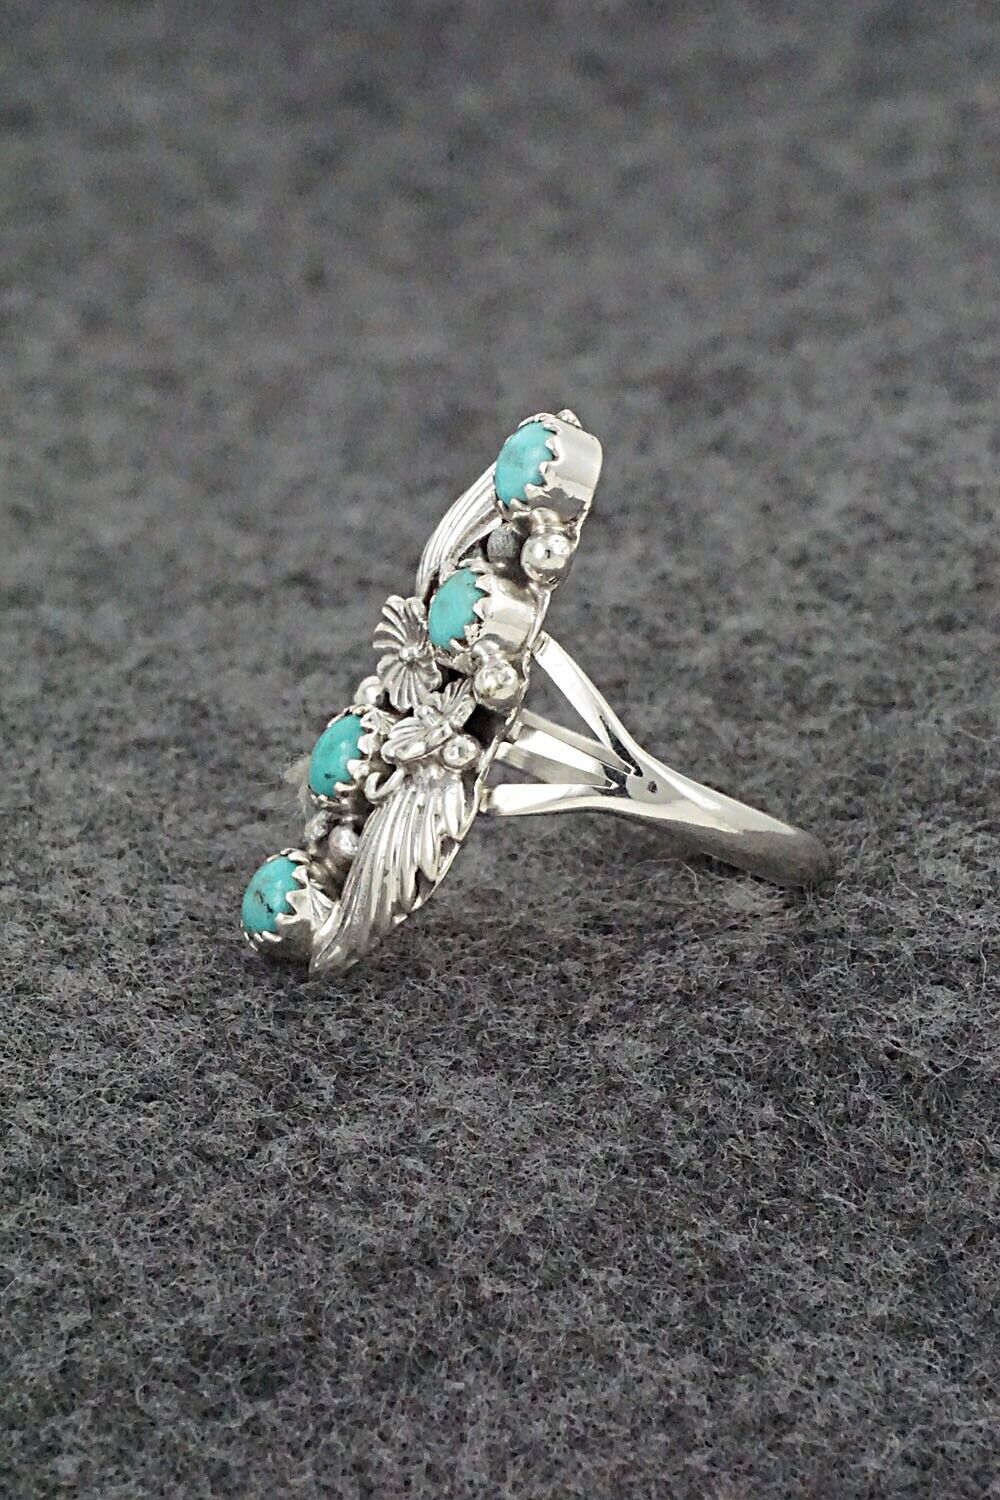 Turquoise & Sterling Silver Ring - Jerryson Henio - Size 6.75